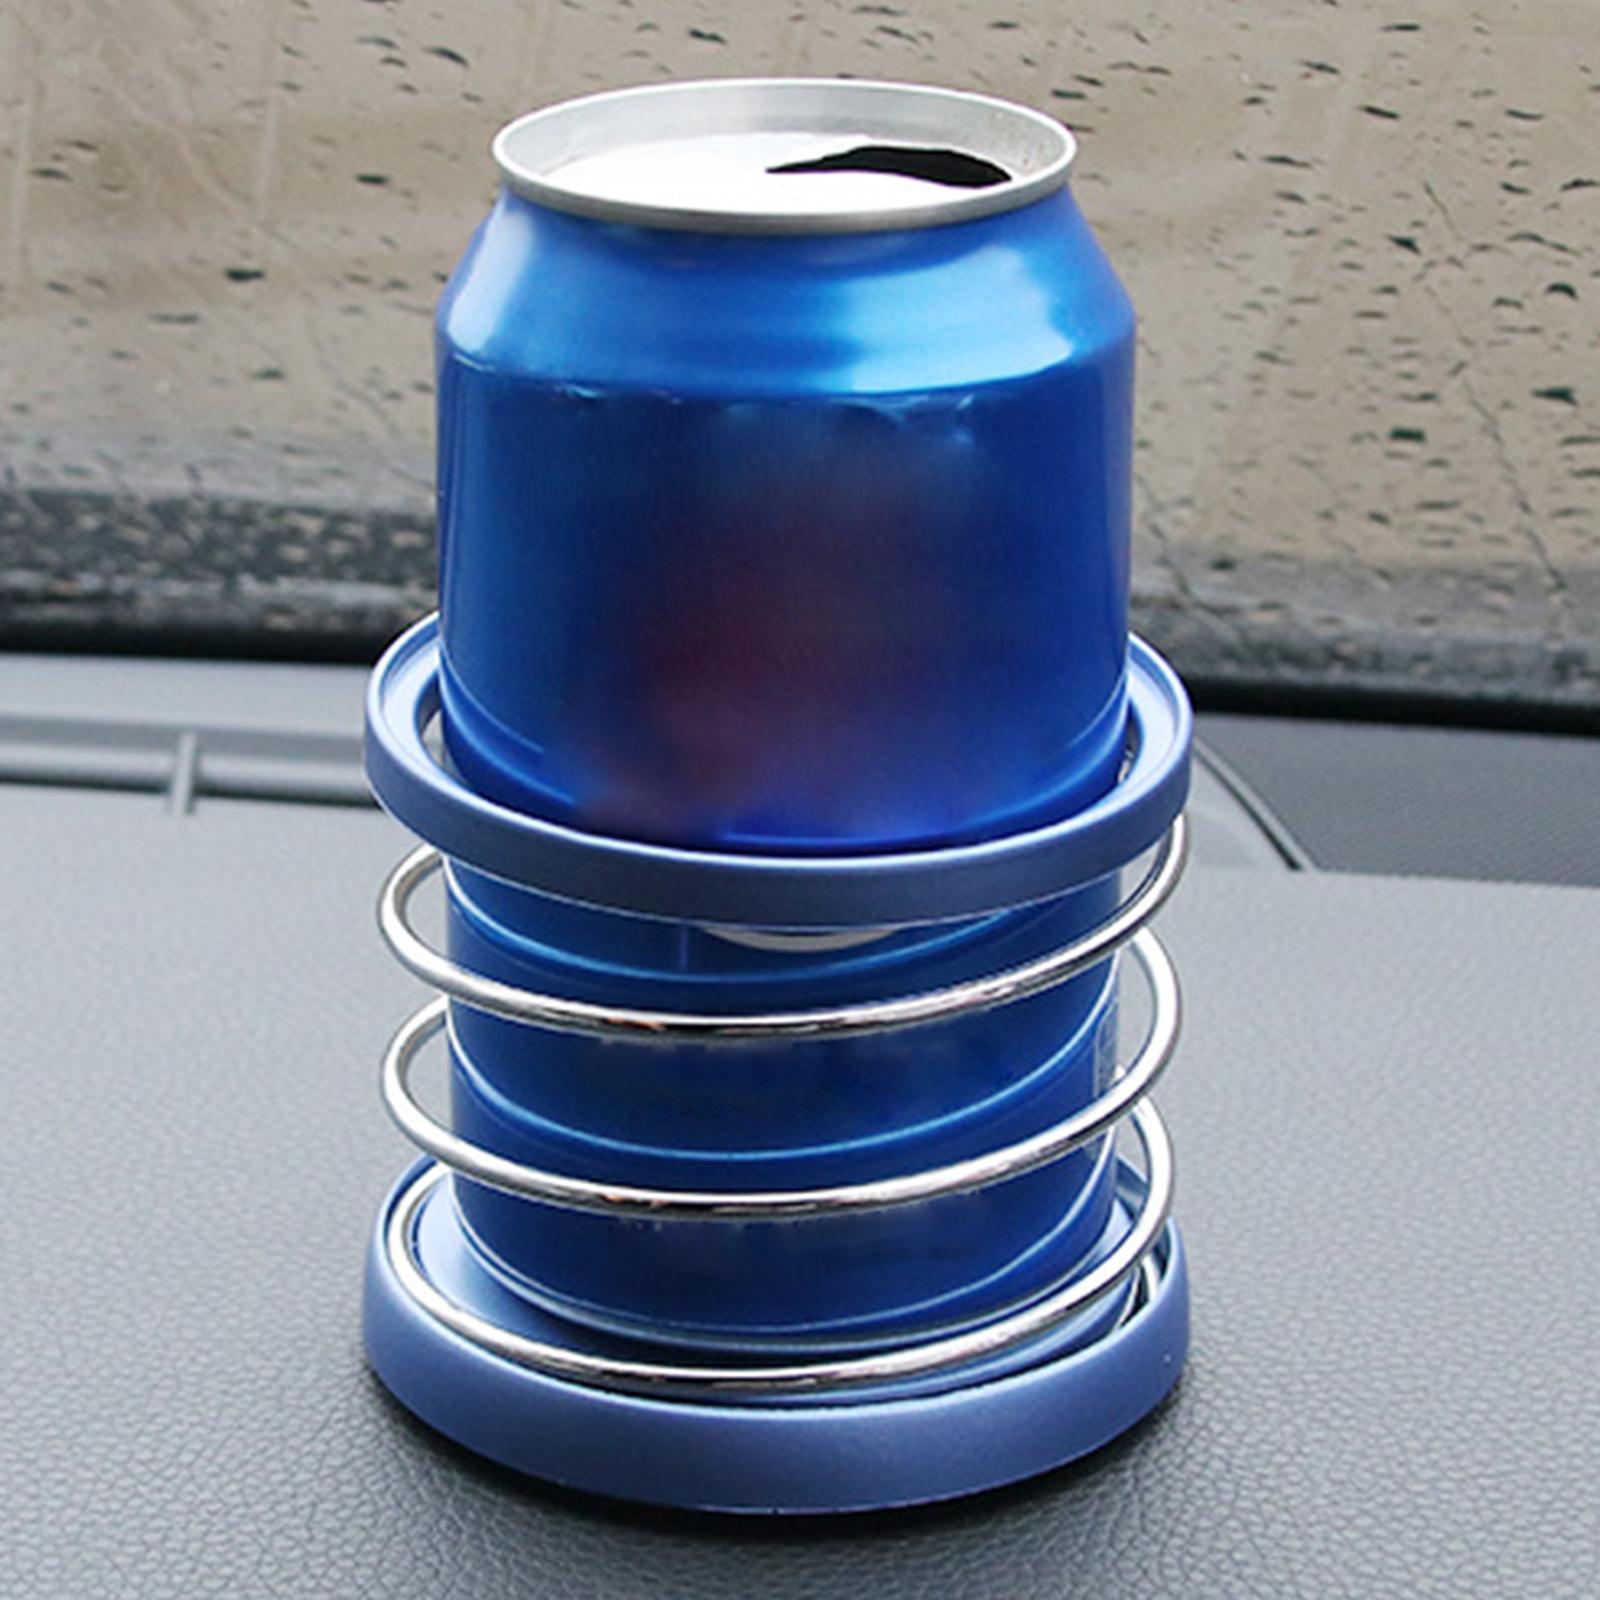 Auto Car Drinks Holder Phone Mount Stand Spring Steel Wire Cup Holder Blue